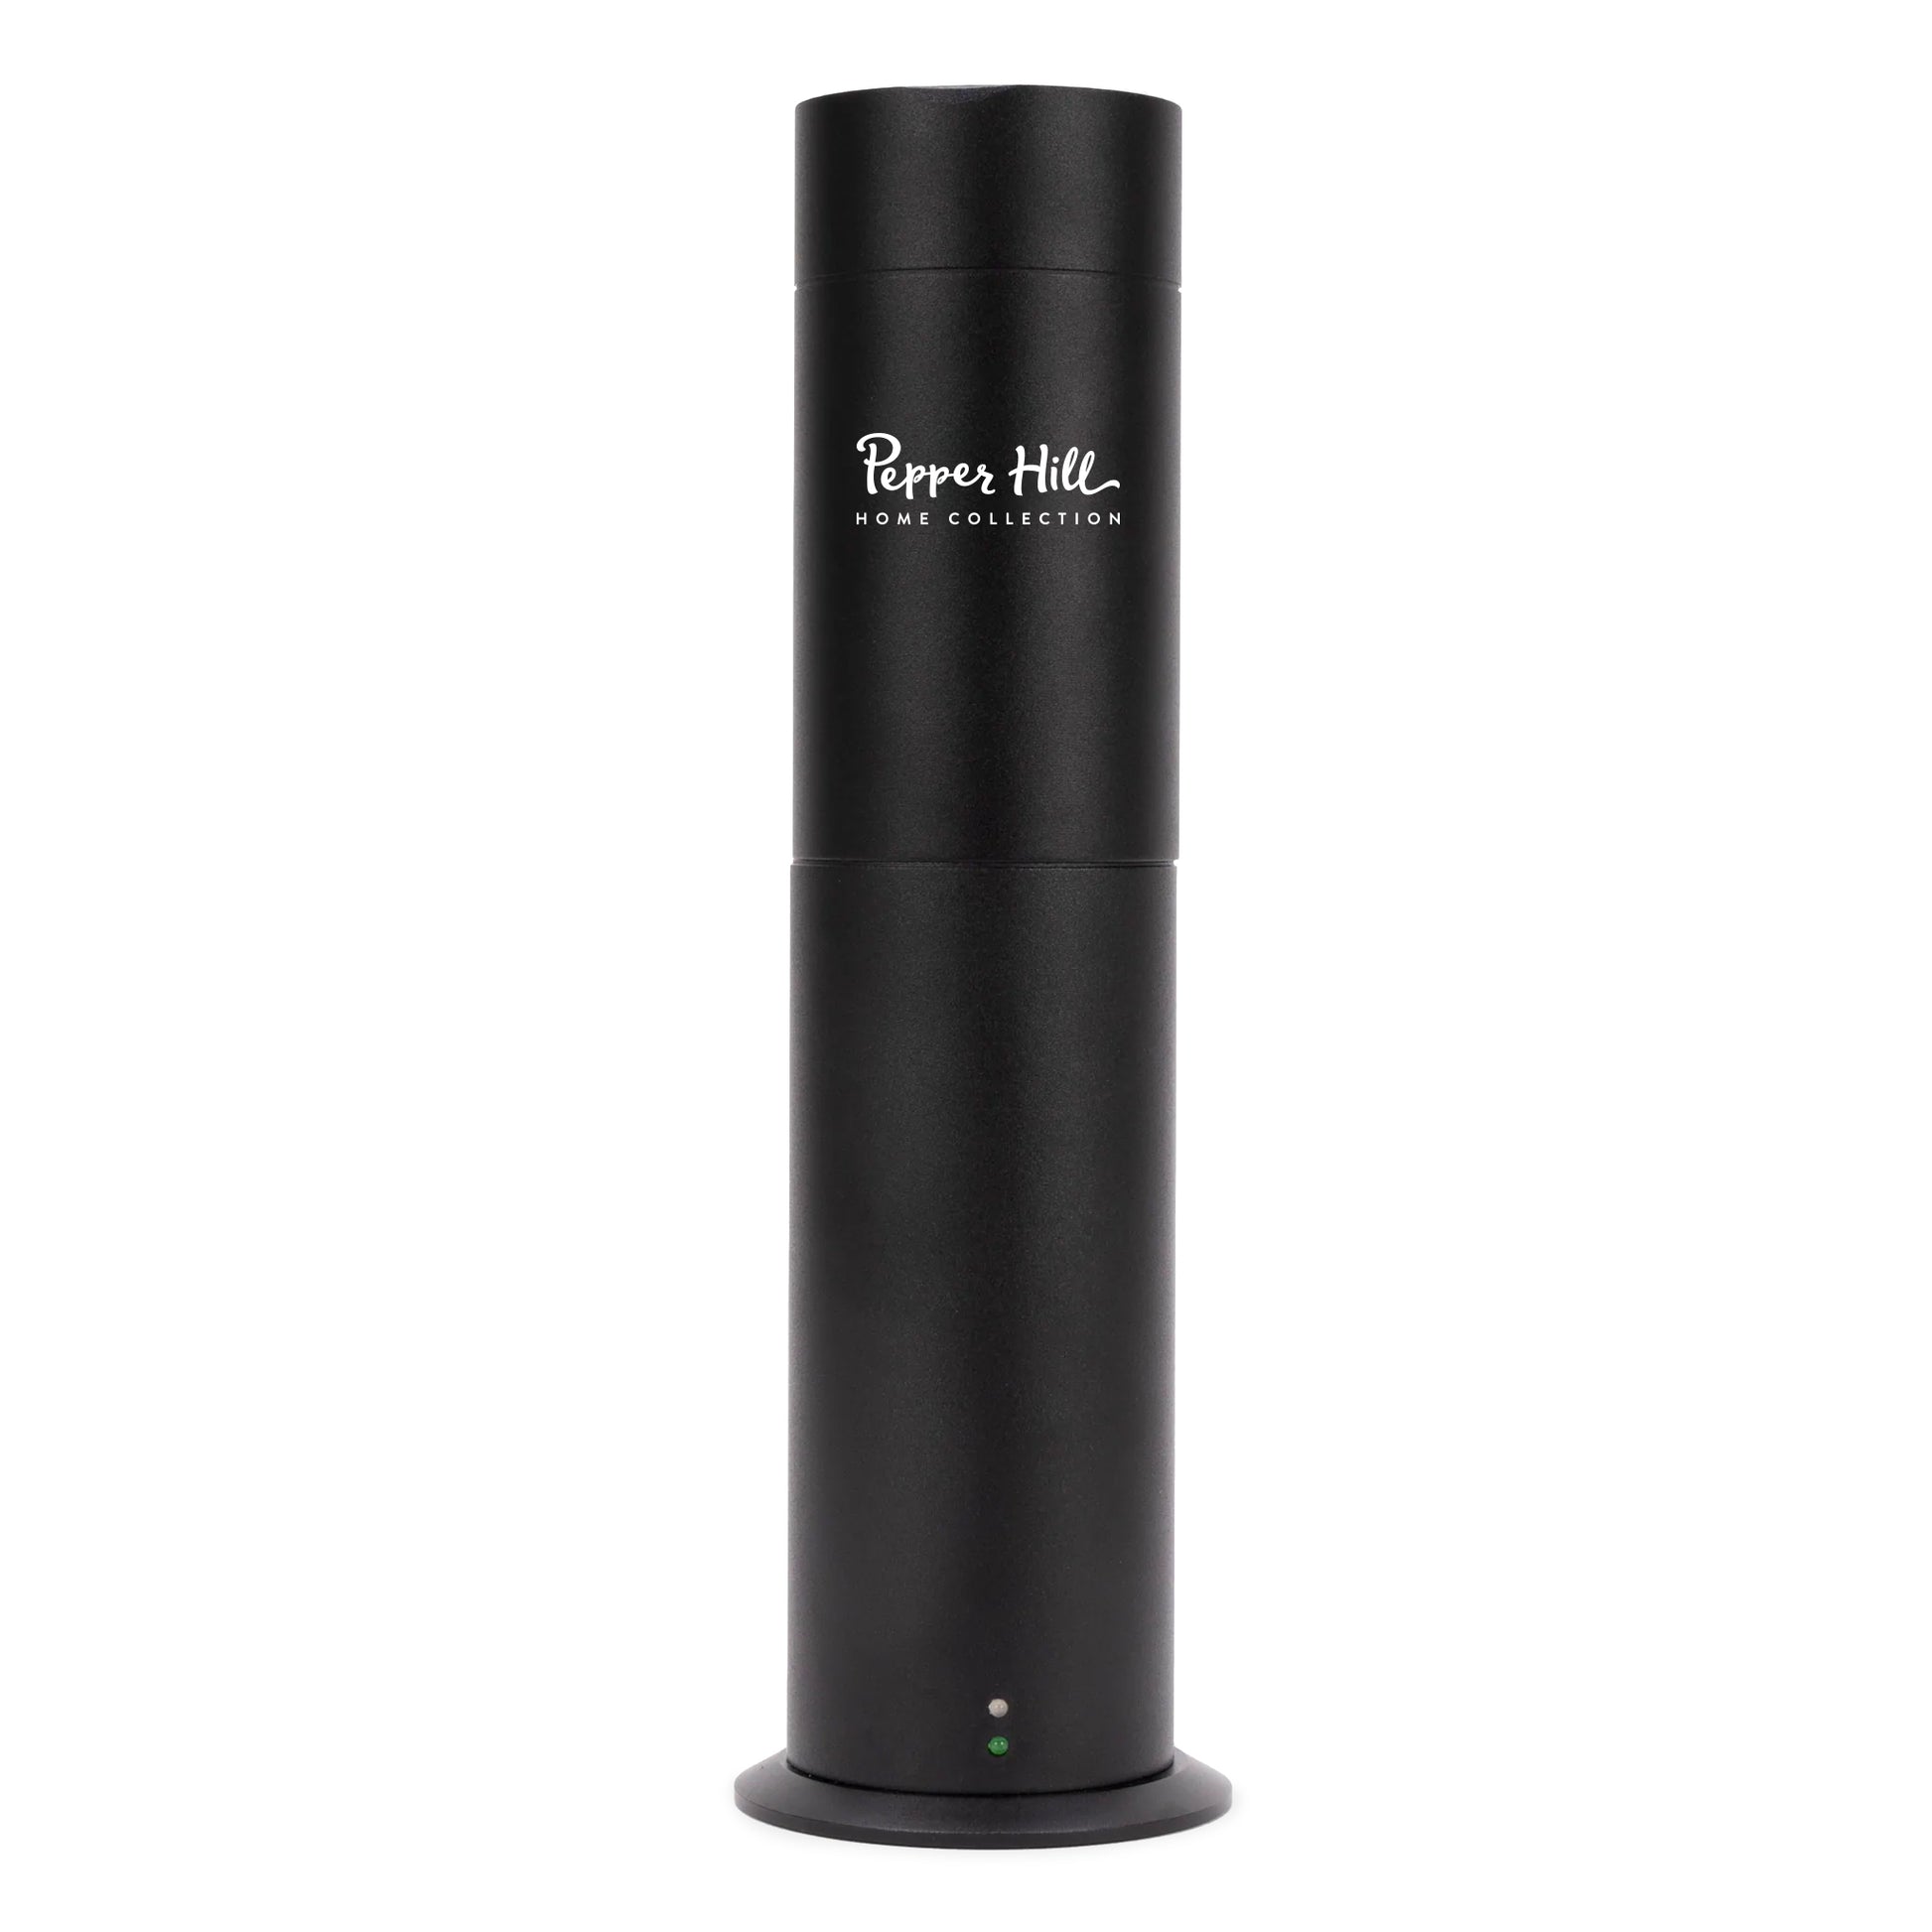 Pepper Hill Home Collection Aroma Diffuser Tower Black 300